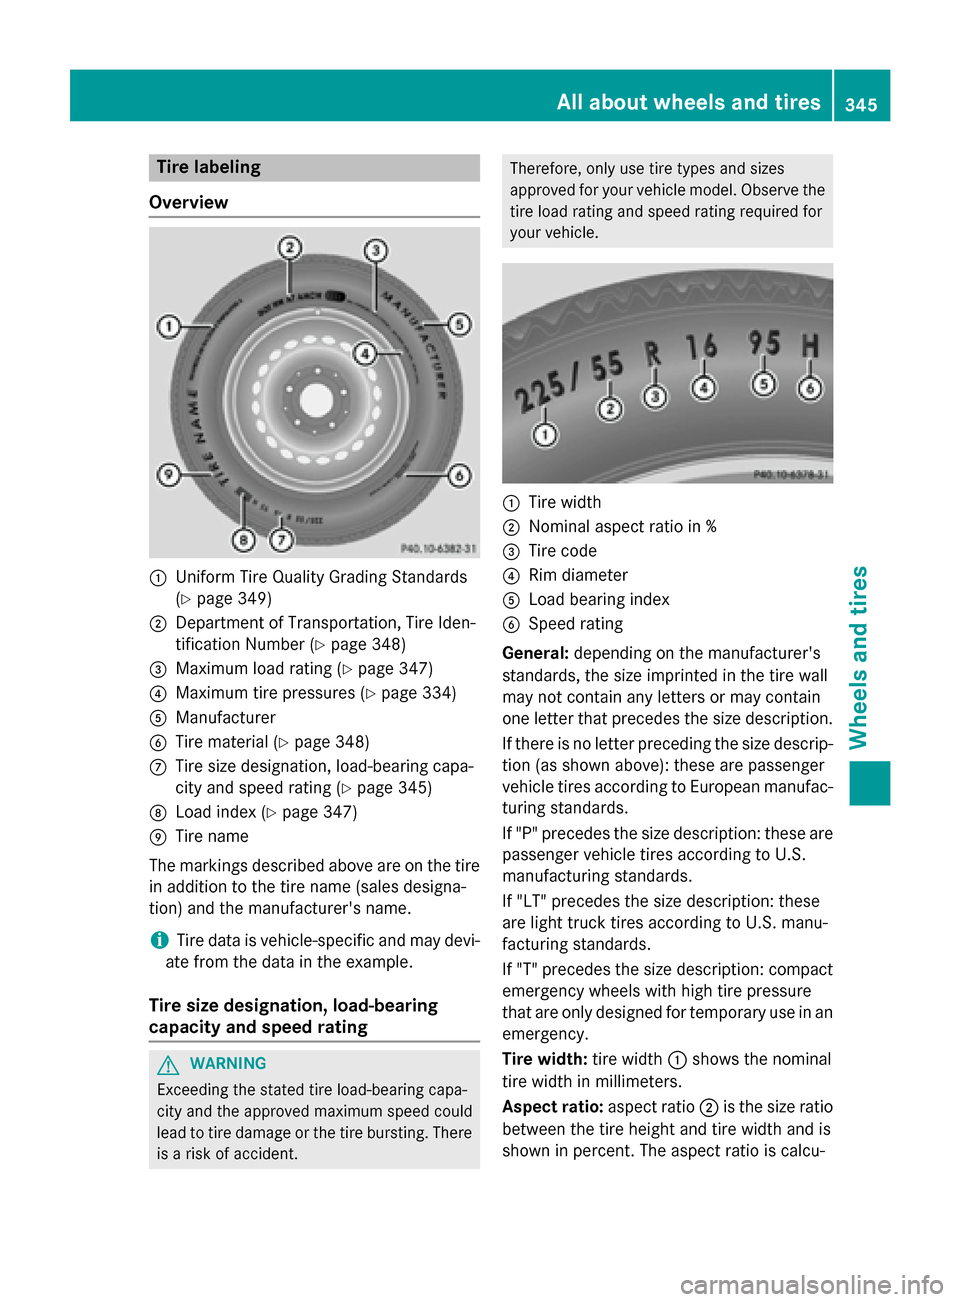 MERCEDES-BENZ CLA-Class 2016 C117 Owners Manual Tire labeling
Overview
:Uniform Tire Quality Grading Standards
(
Ypage 349)
;Department of Transportation, Tire Iden-
tification Number (
Ypage 348)
=Maximum load rating (Ypage 347)
?Maximum tire pres